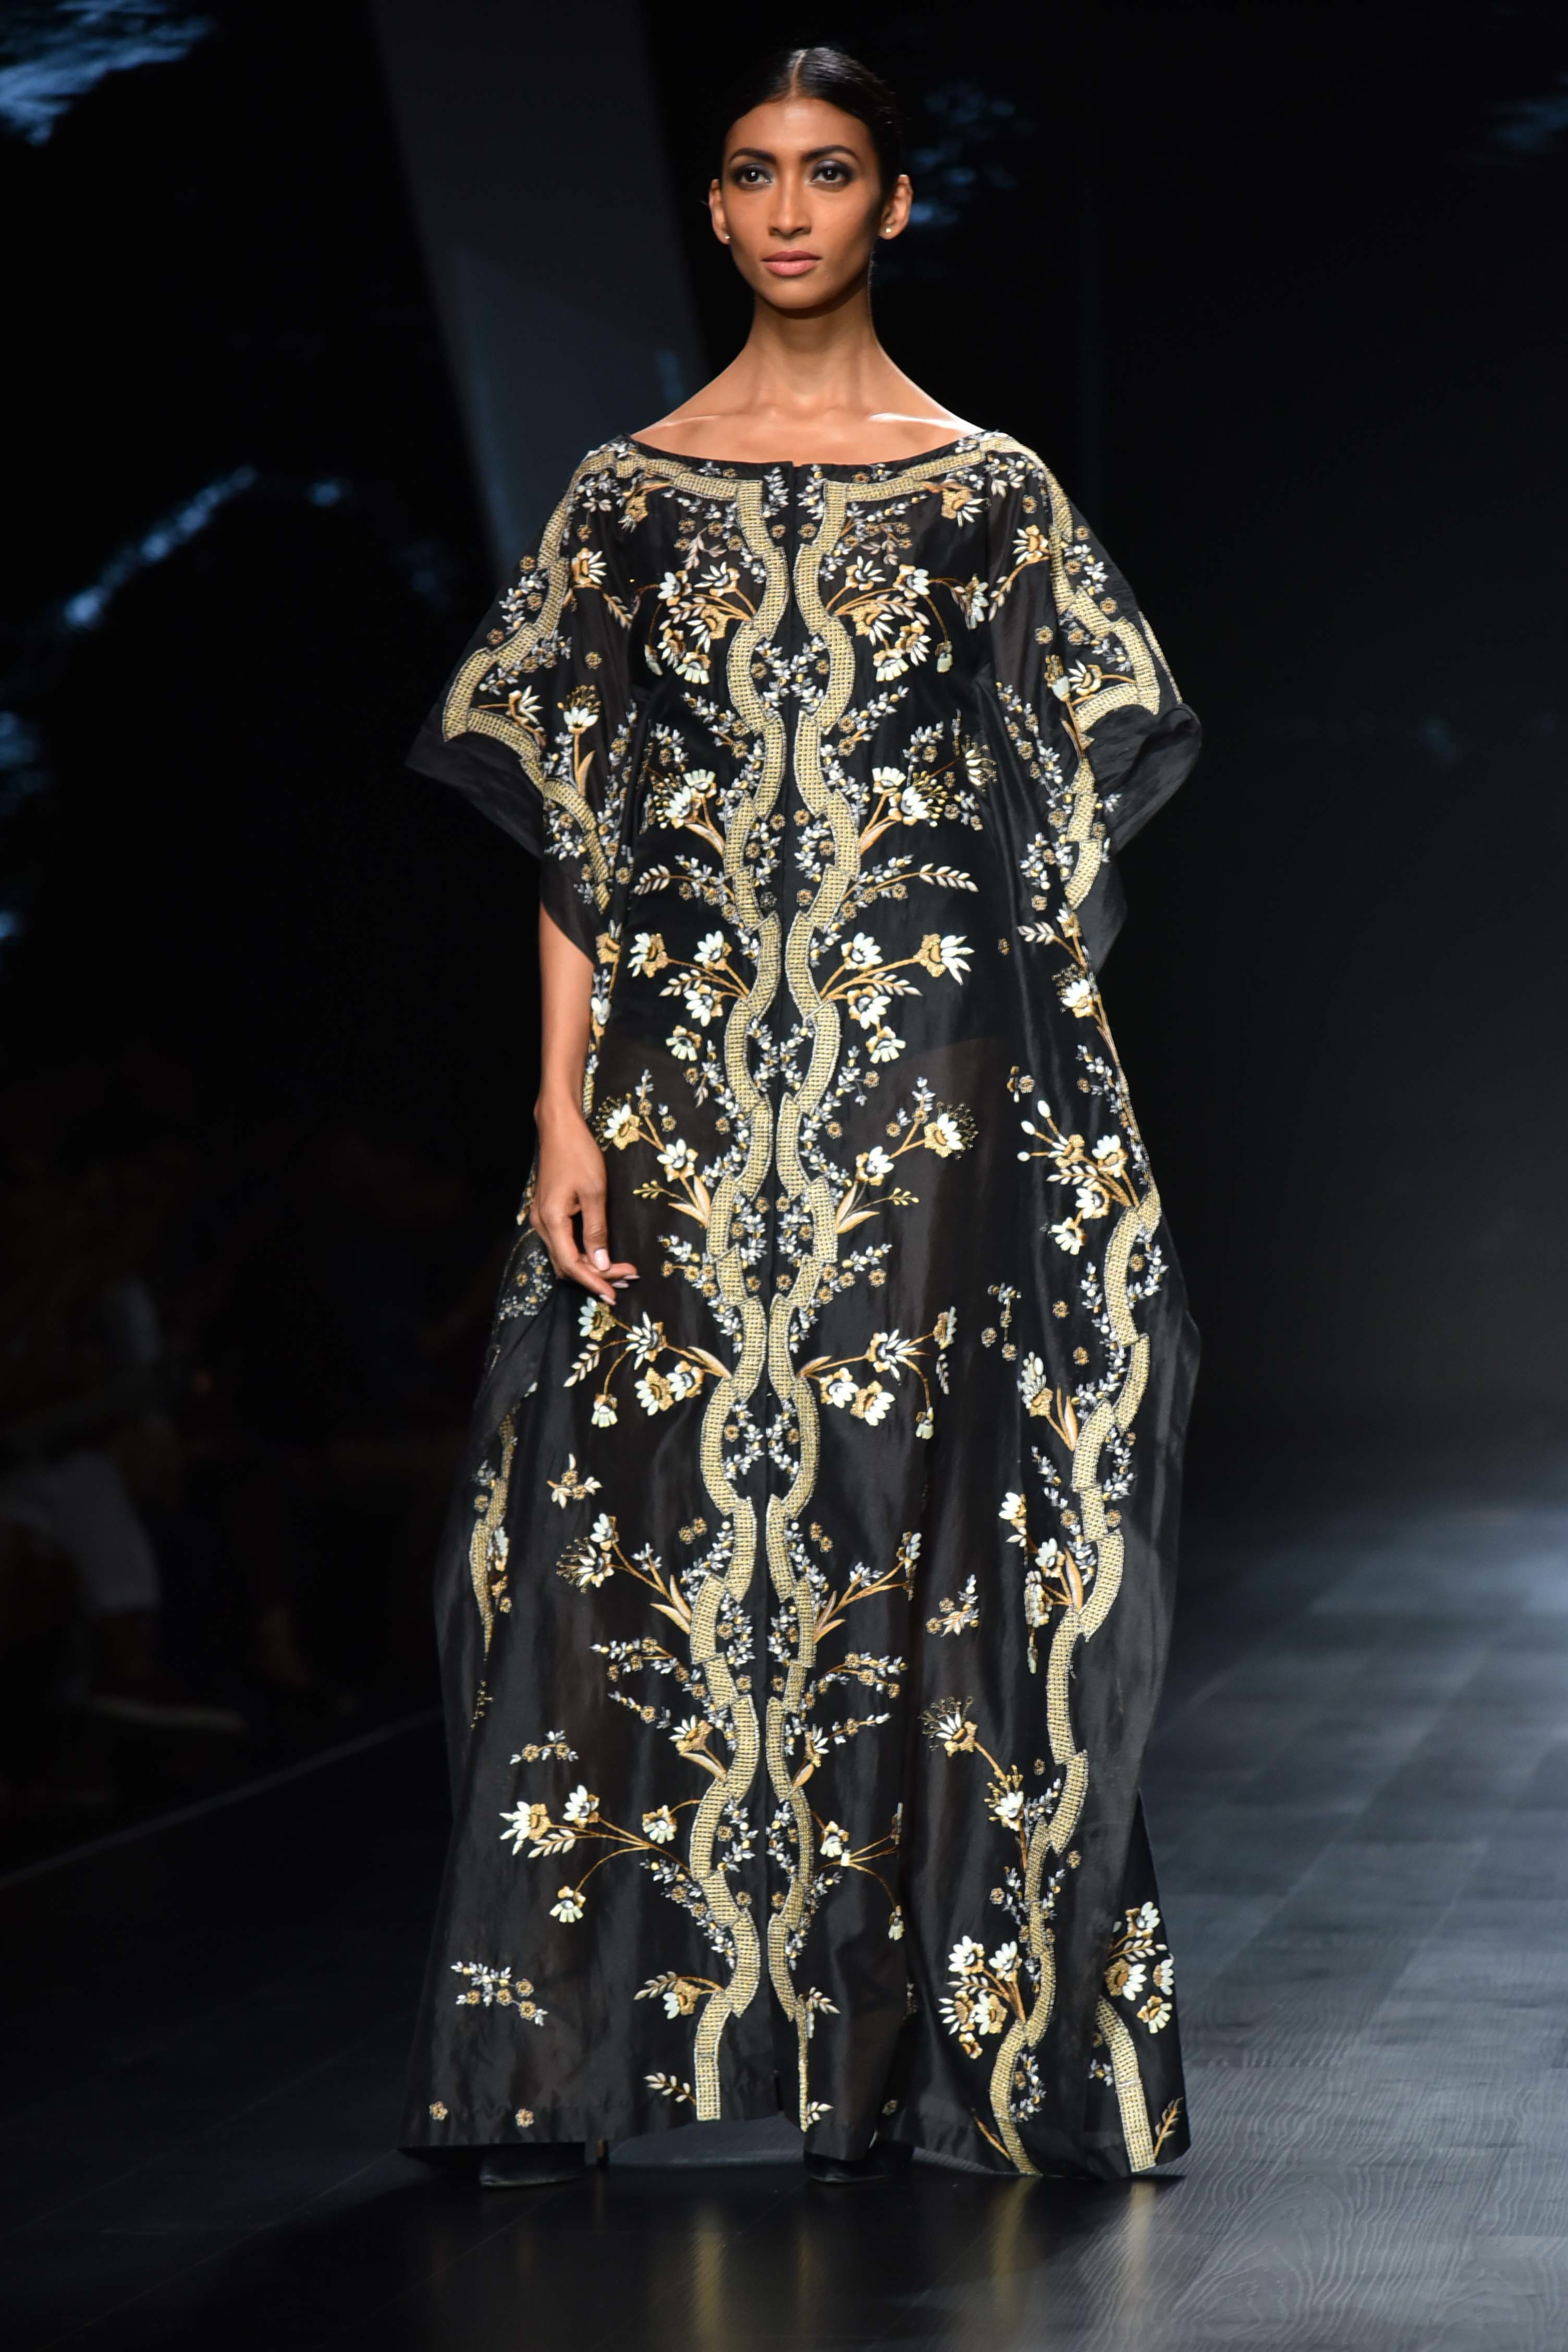 Highlights From Samant Chauhan's AIFW Show | Grazia India